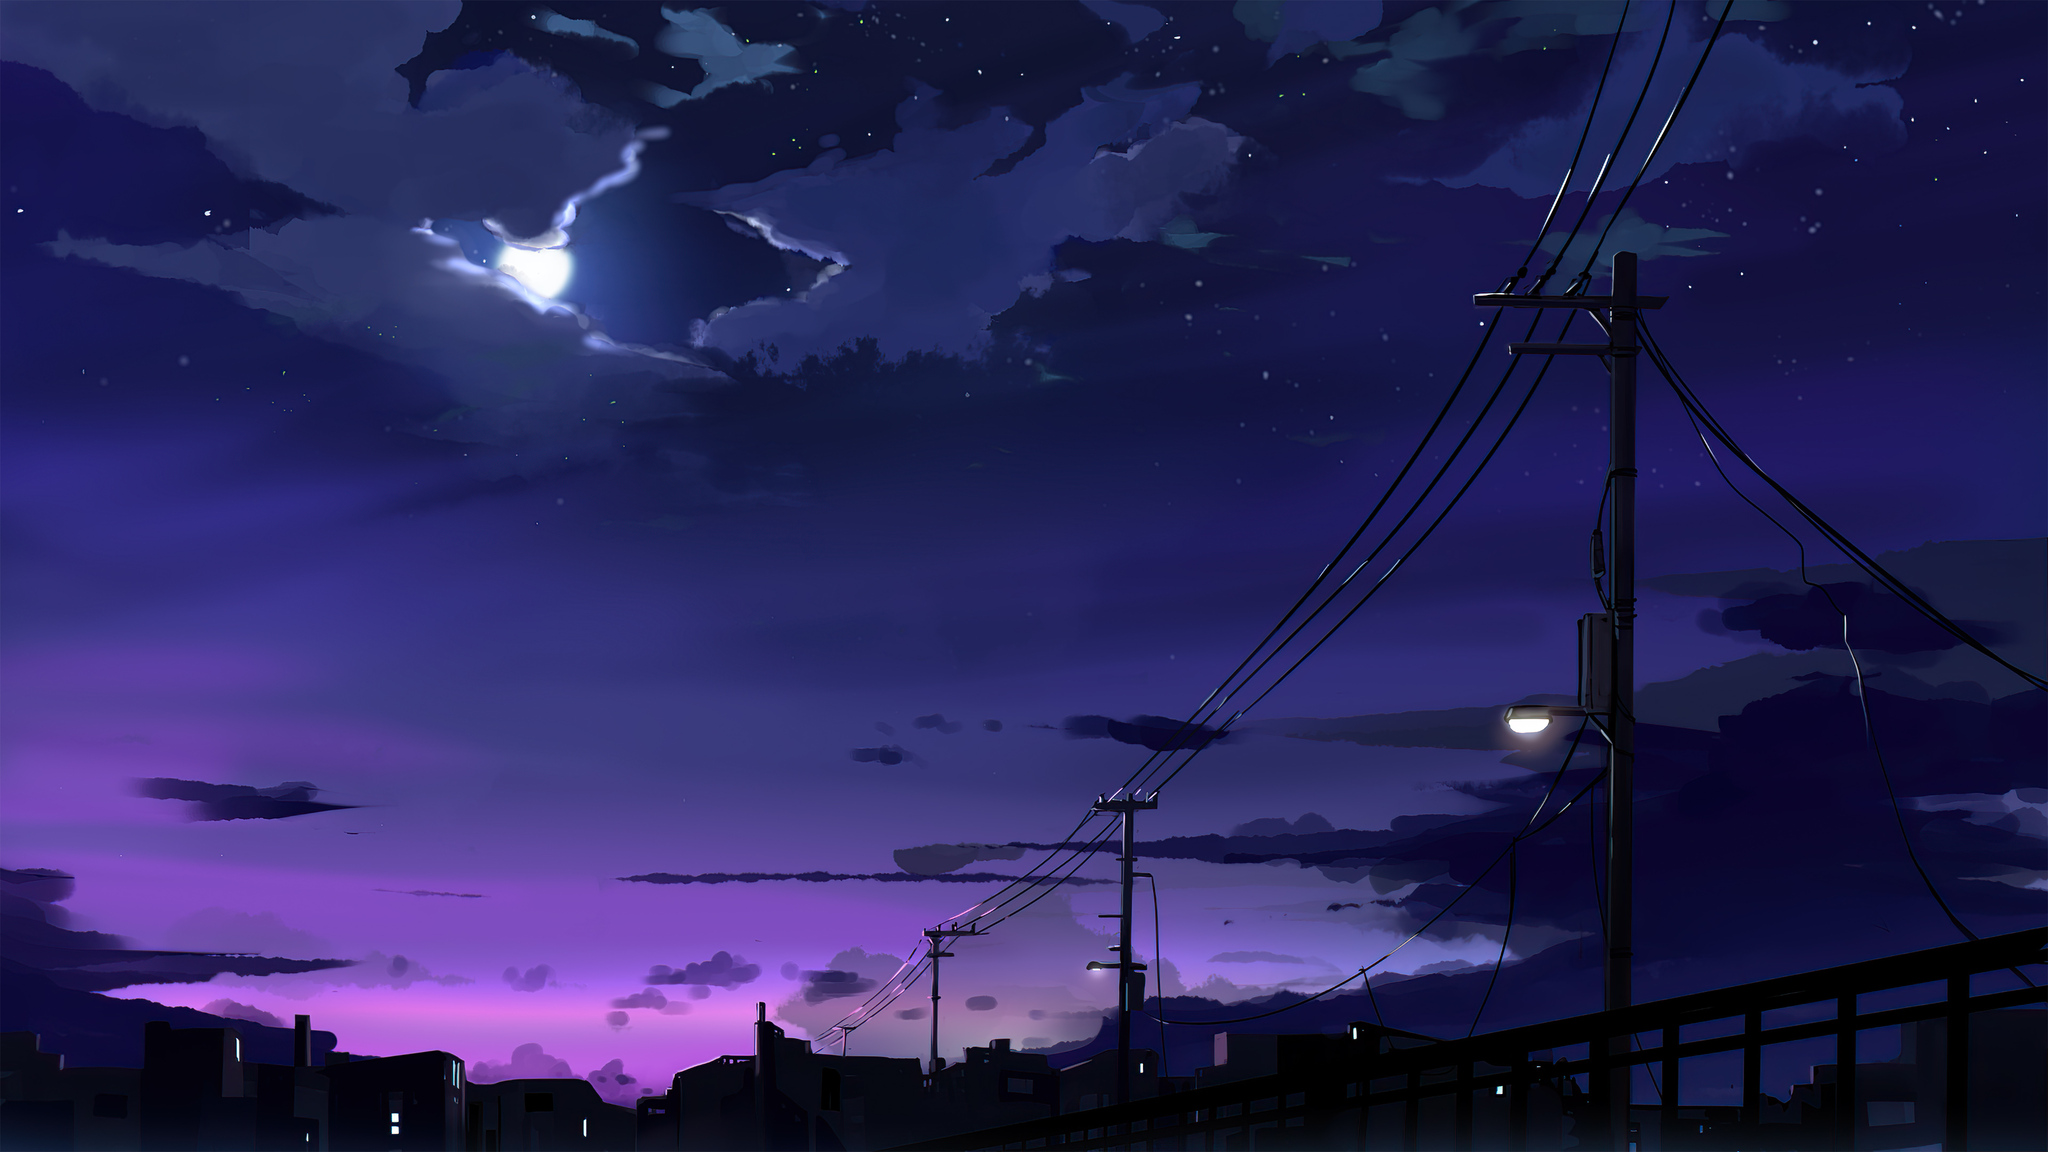 3409 Anime Moon Images Stock Photos  Vectors  Shutterstock